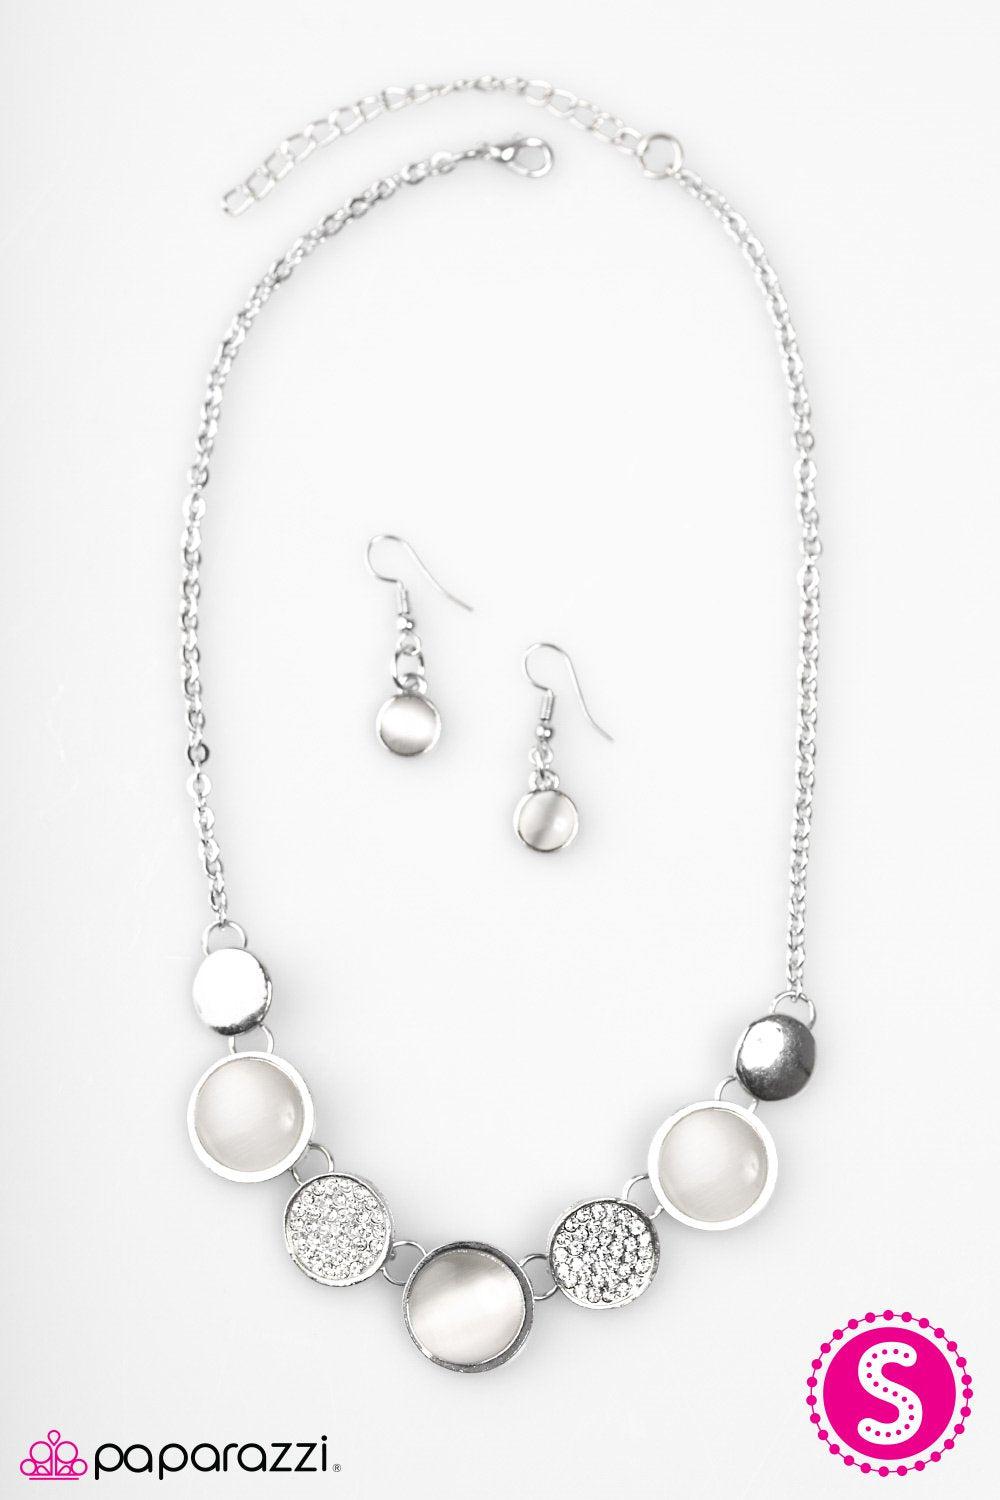 Keep Calm and Sparkle On White Moonstone Necklace and matching Earrings - Paparazzi Accessories-CarasShop.com - $5 Jewelry by Cara Jewels